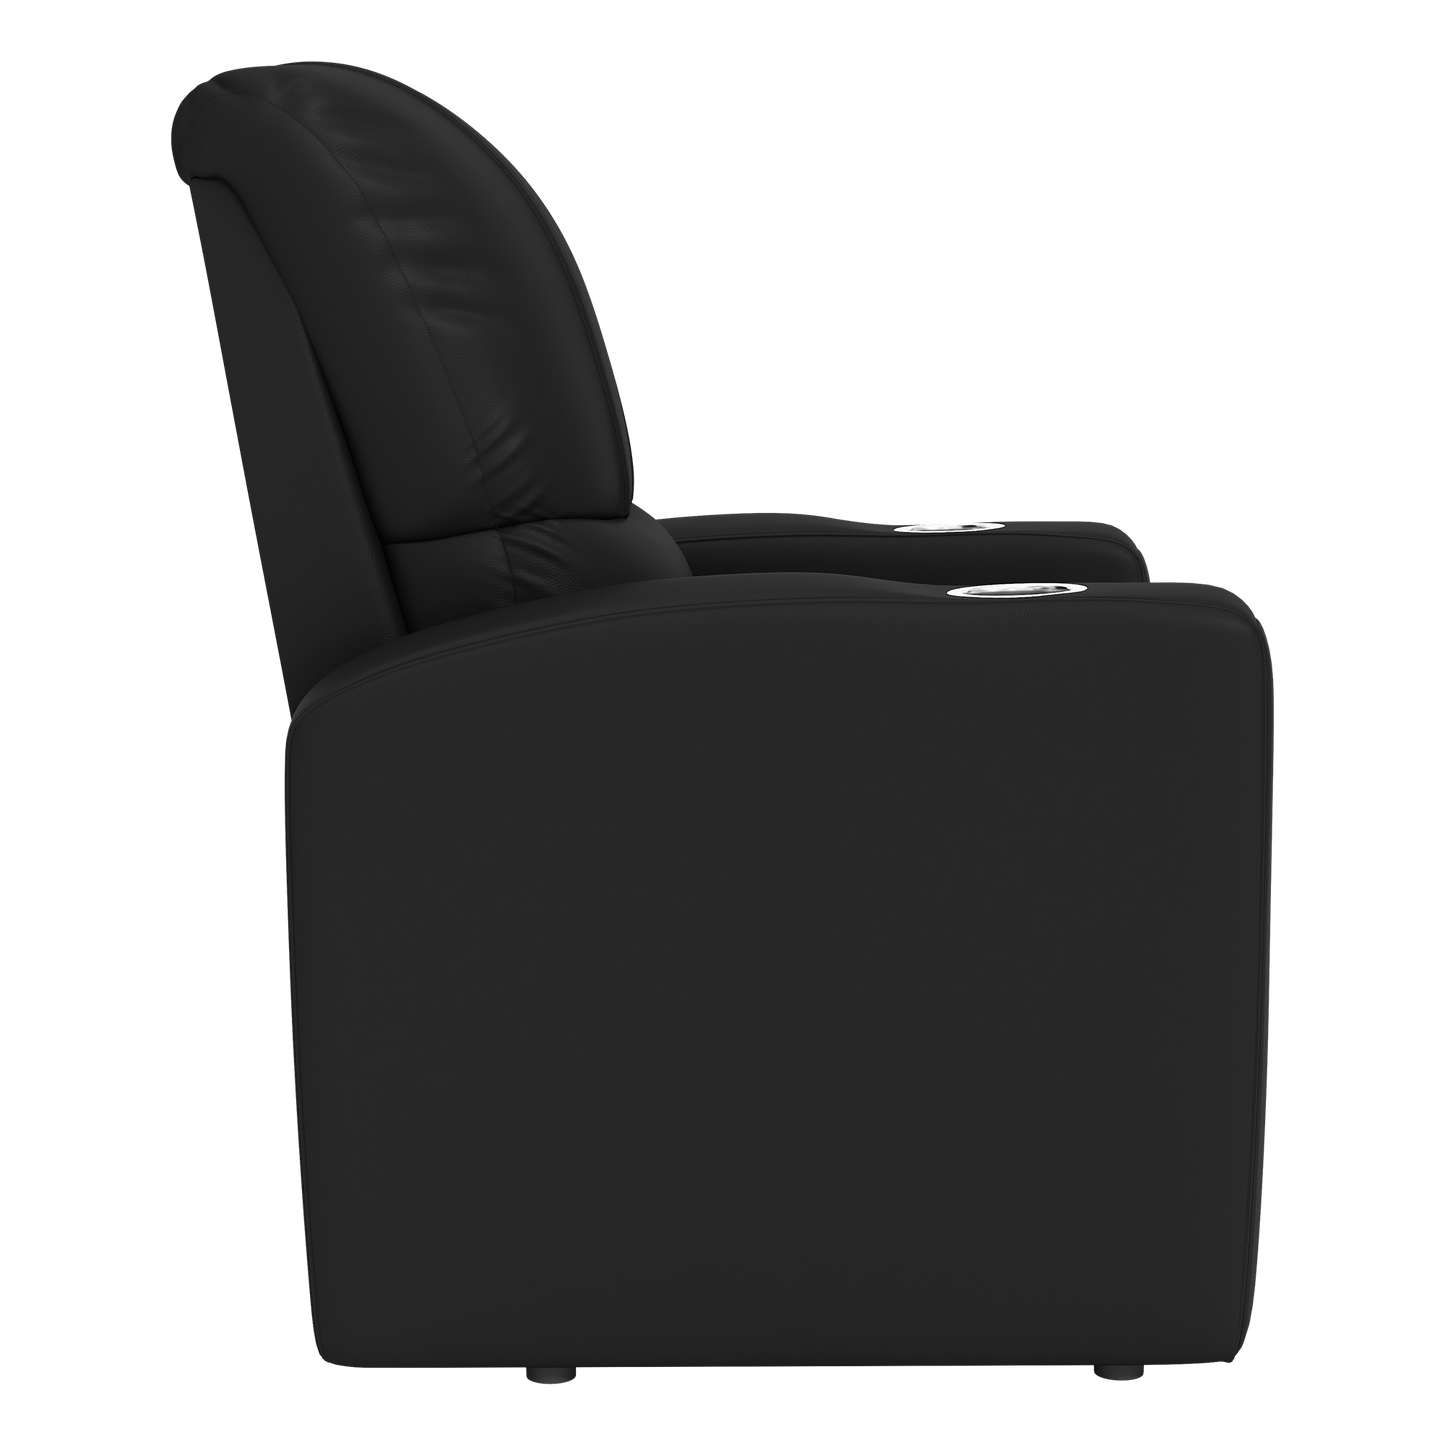 Stealth Recliner with Real Salt Lake Logo